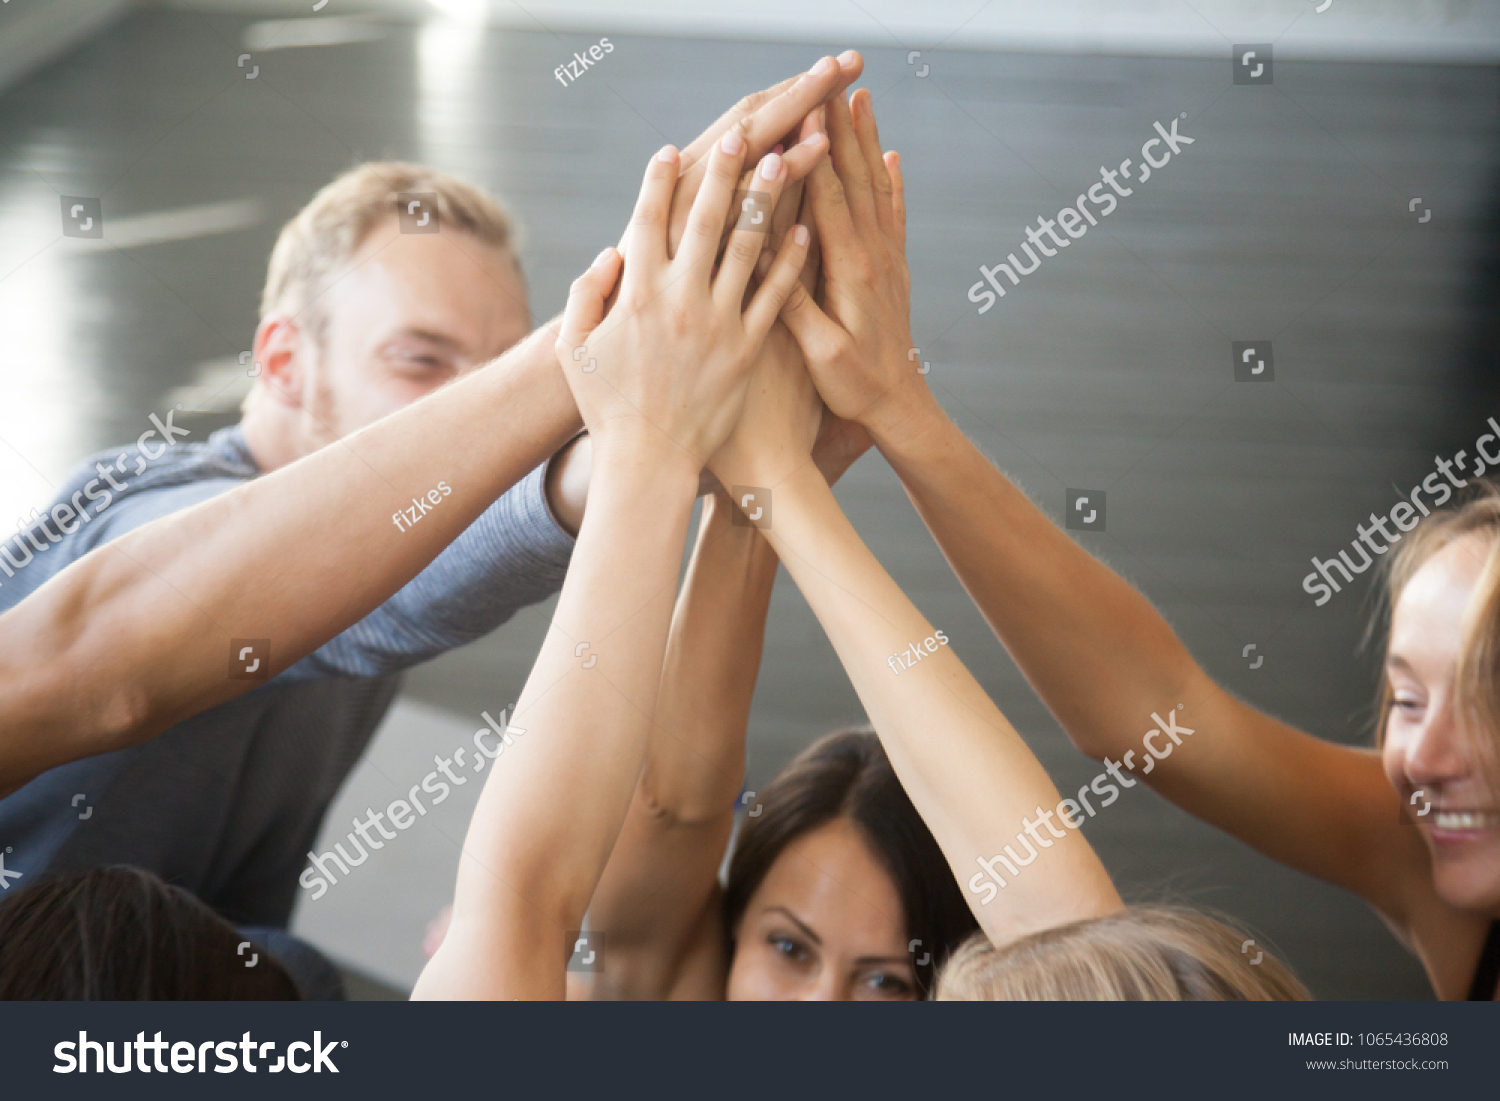 Group of fit happy people giving high five in fitness studio room, talking in a circle after seminar training. Setting goal, achieving team results. Teamwork, mindfulness, active life benefits concept #1065436808